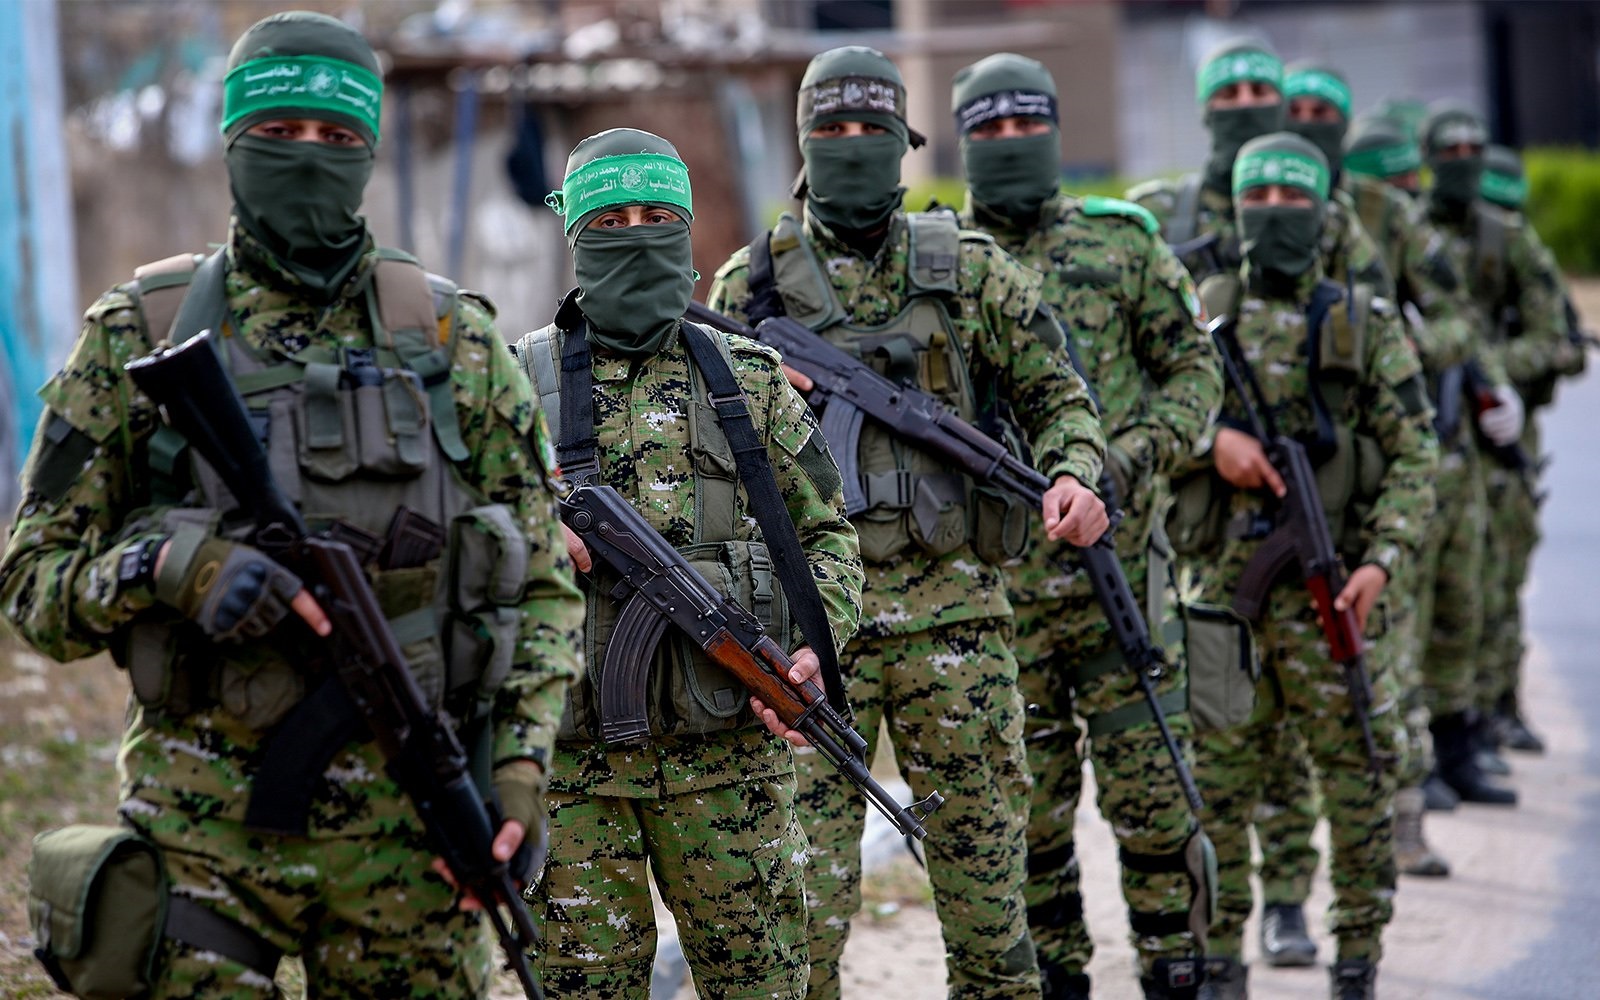 Hamas soldiers. Image Credit: Israeli government.